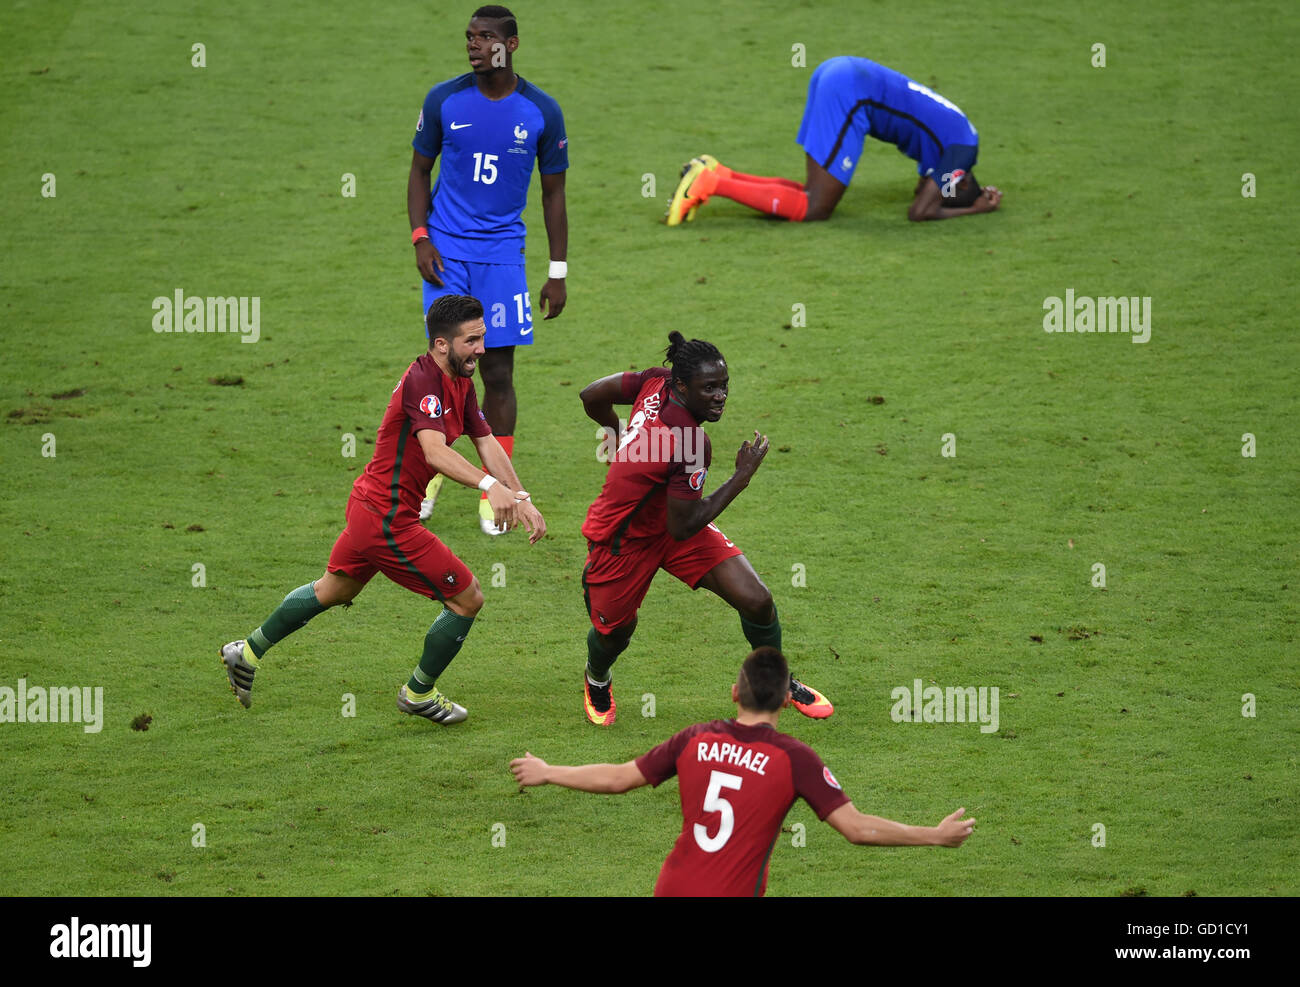 Portugal players celebrate after Eder (right) scores his side's first goal of the game during the UEFA Euro 2016 Final at the Stade de France, Paris. Stock Photo